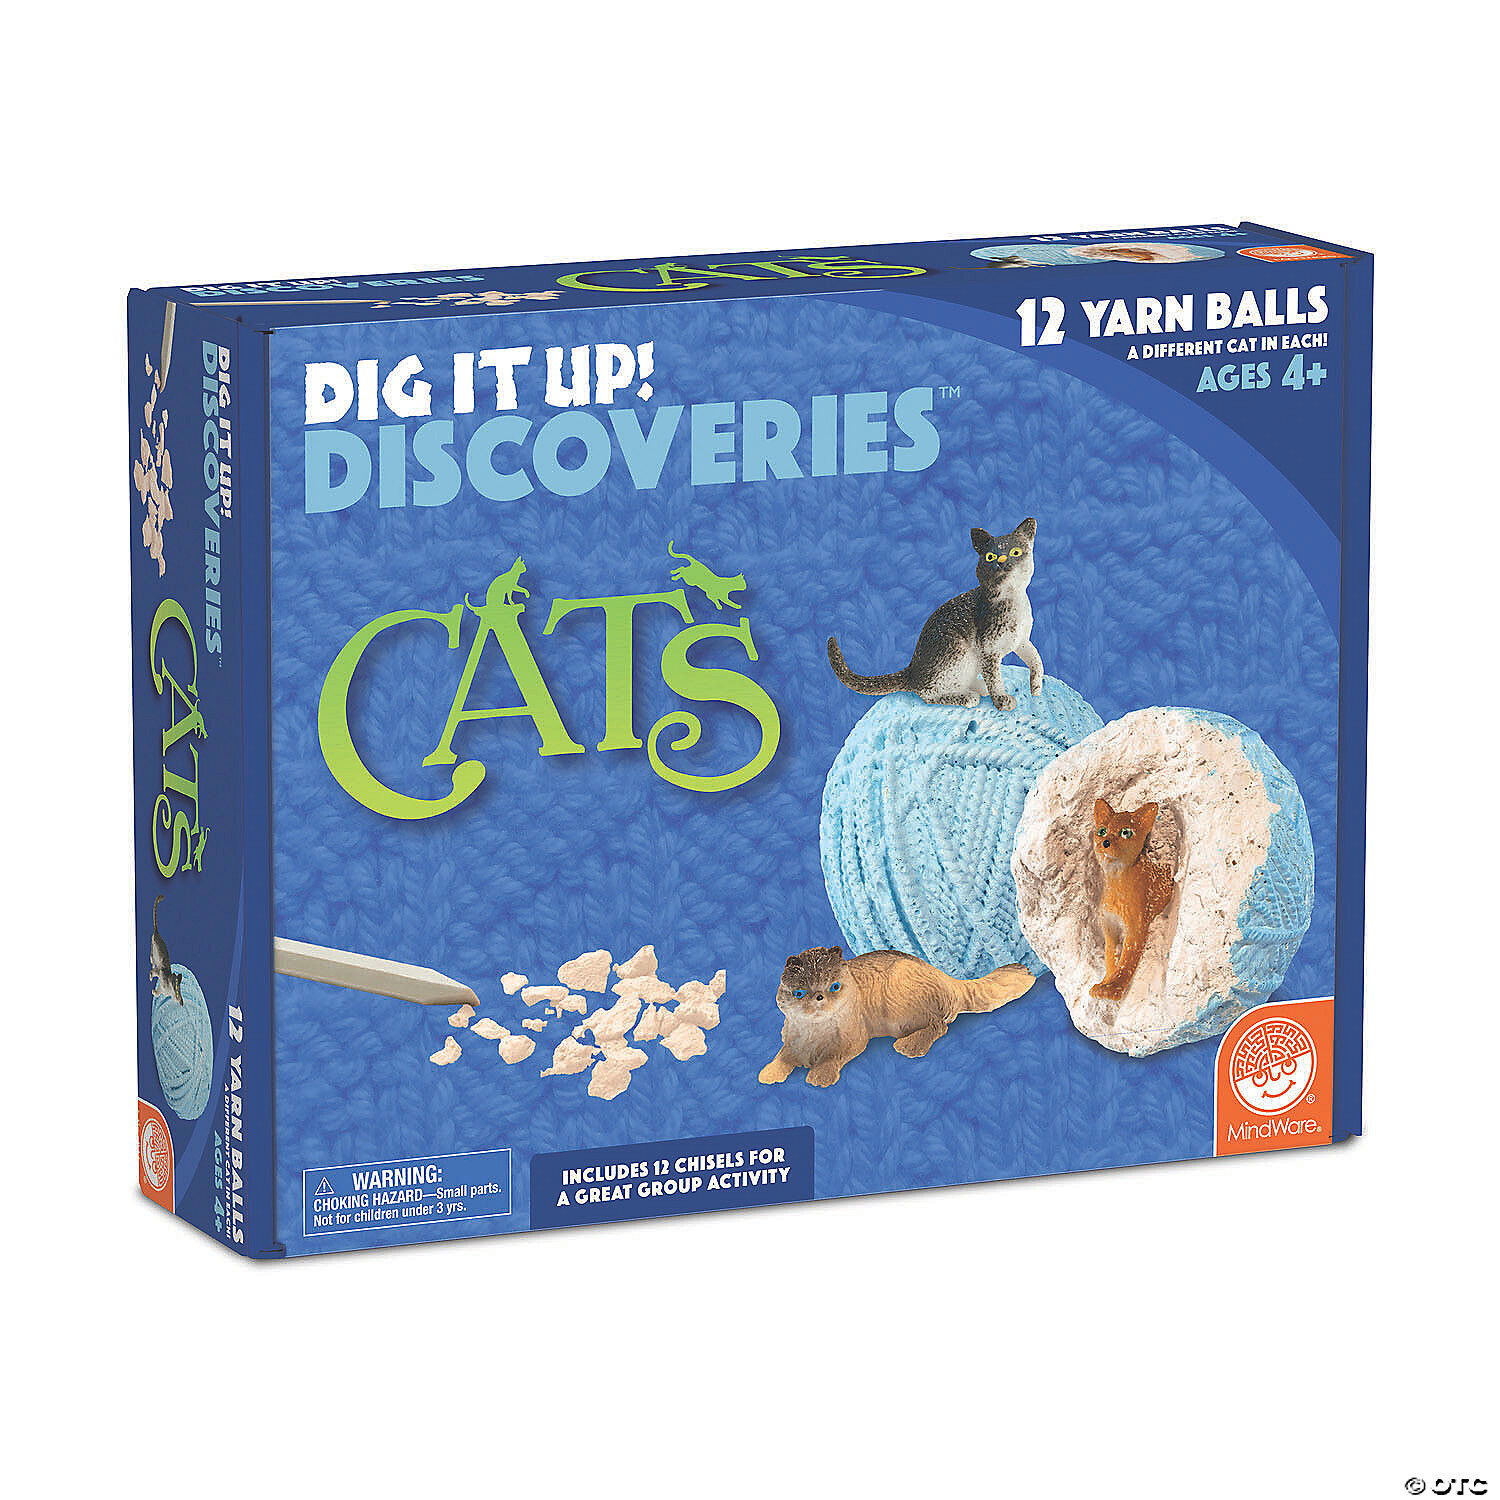 Dig It Up!: Discoveries: Cats